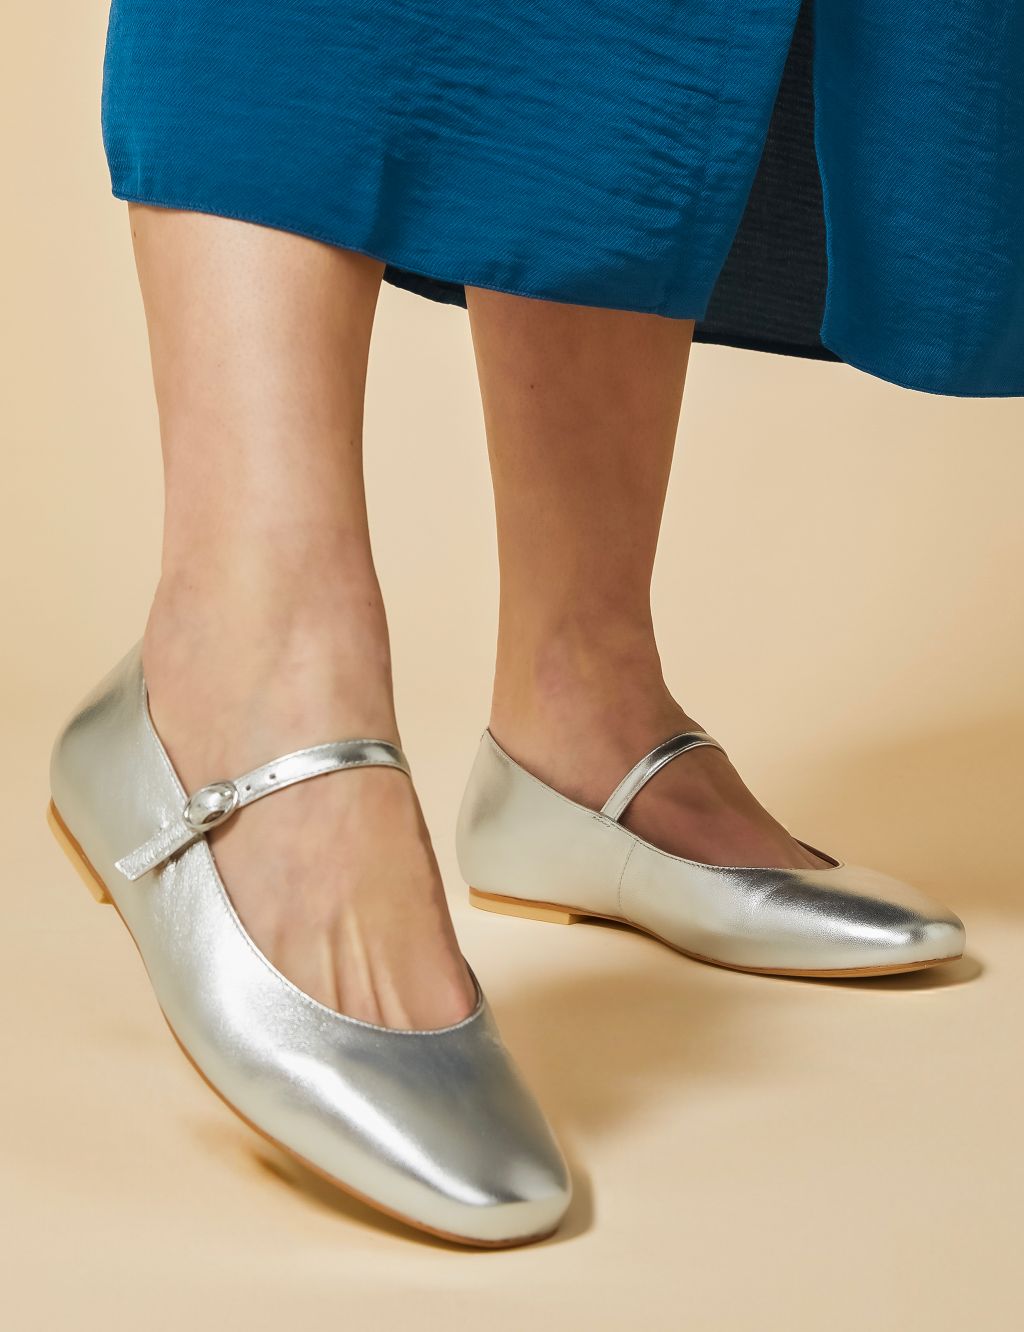 A guide to wearing flat shoes from Jones Bootmaker